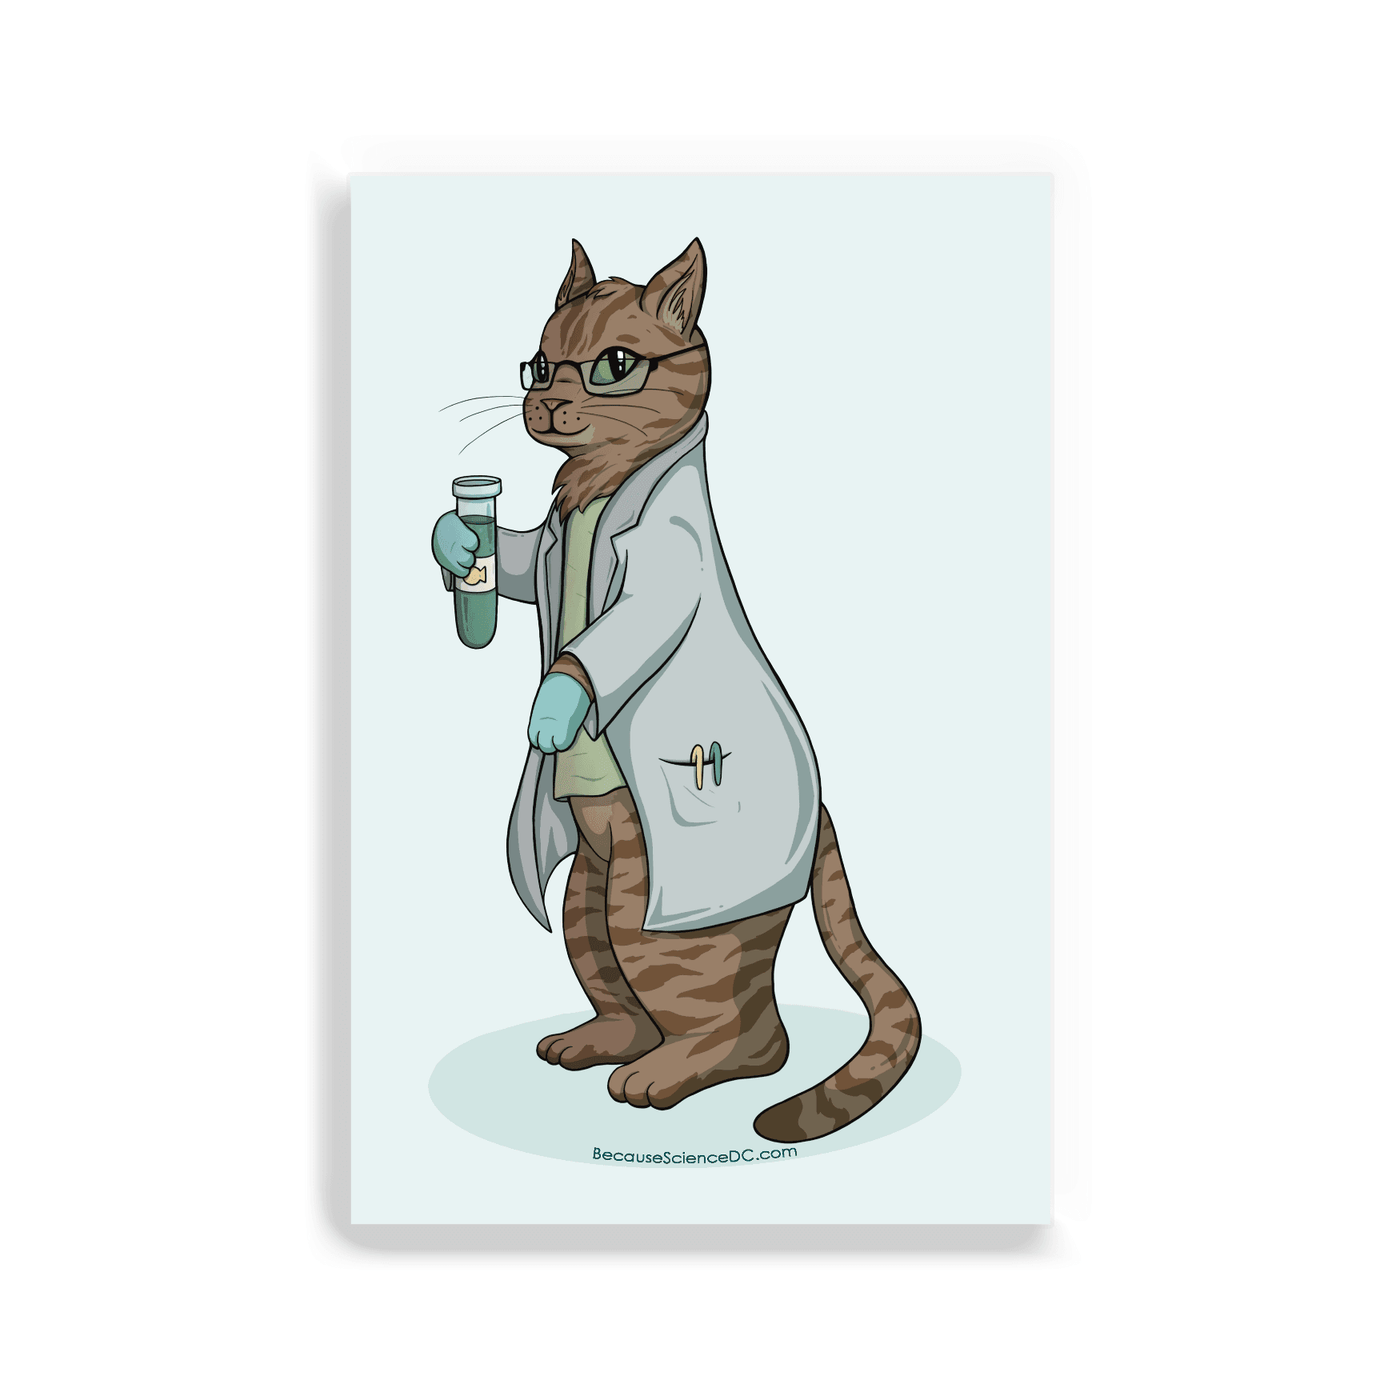 2x3 colorful magnet with image of a cat in a lab coat holding a test tube